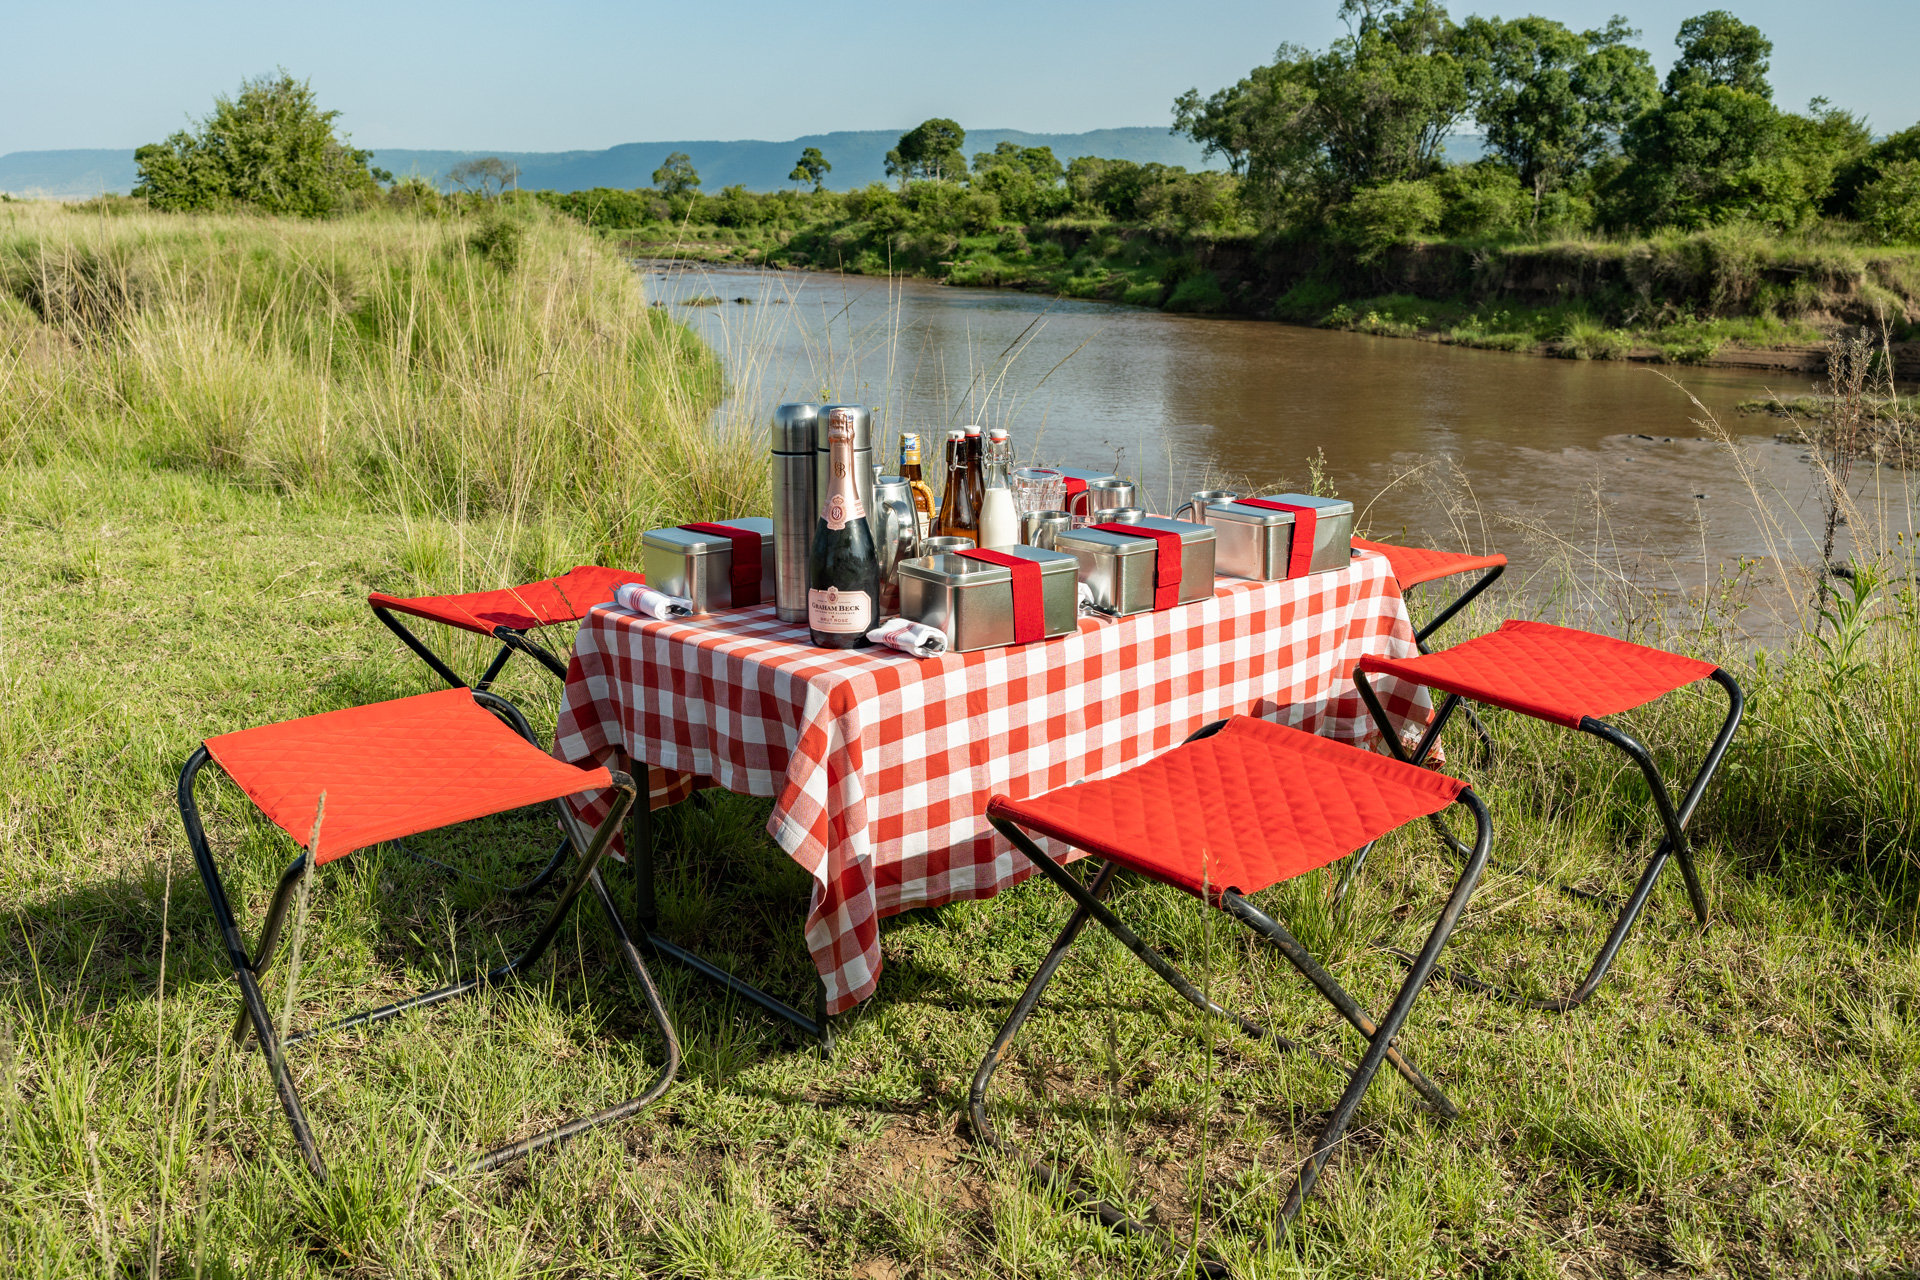 Graham Beck MCC tastes even better when sipped on the banks of the Mara River 